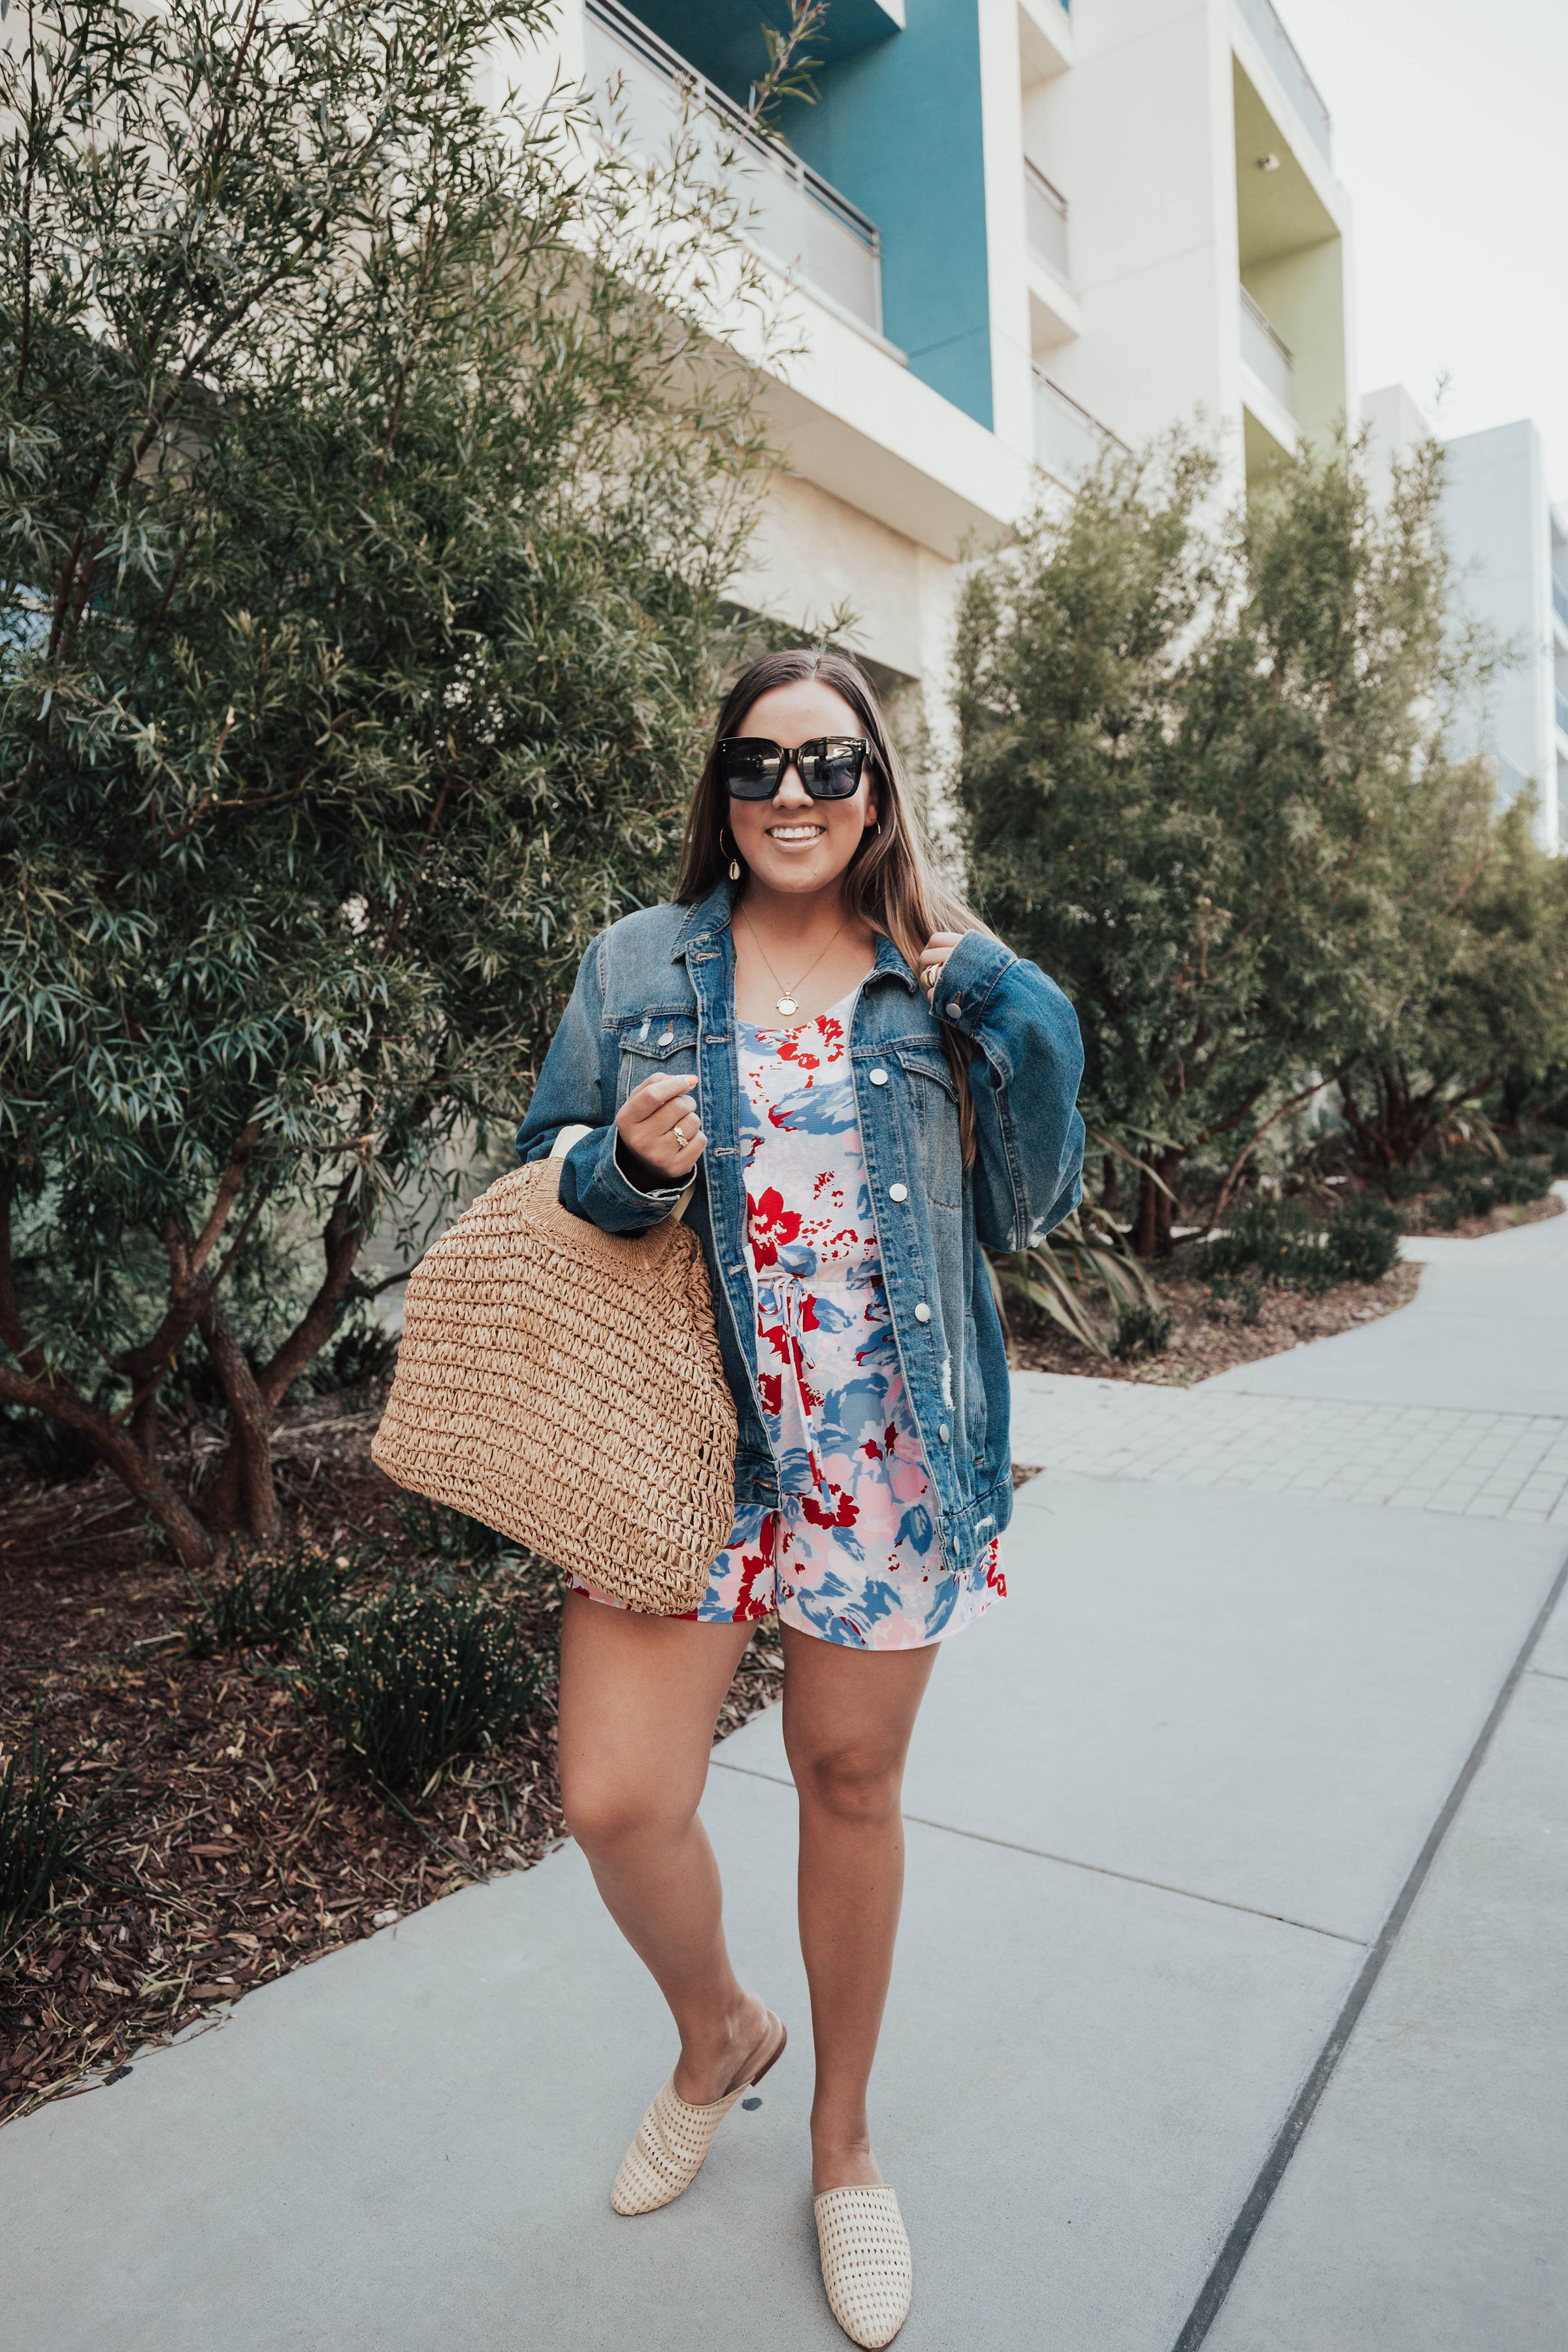 San Francisco blogger, Ashley Zeal, from Two Peas in a Prada shares her 4th of July Outfit ideas. She is sharing a ton of red, white and blue items you can mix and match!